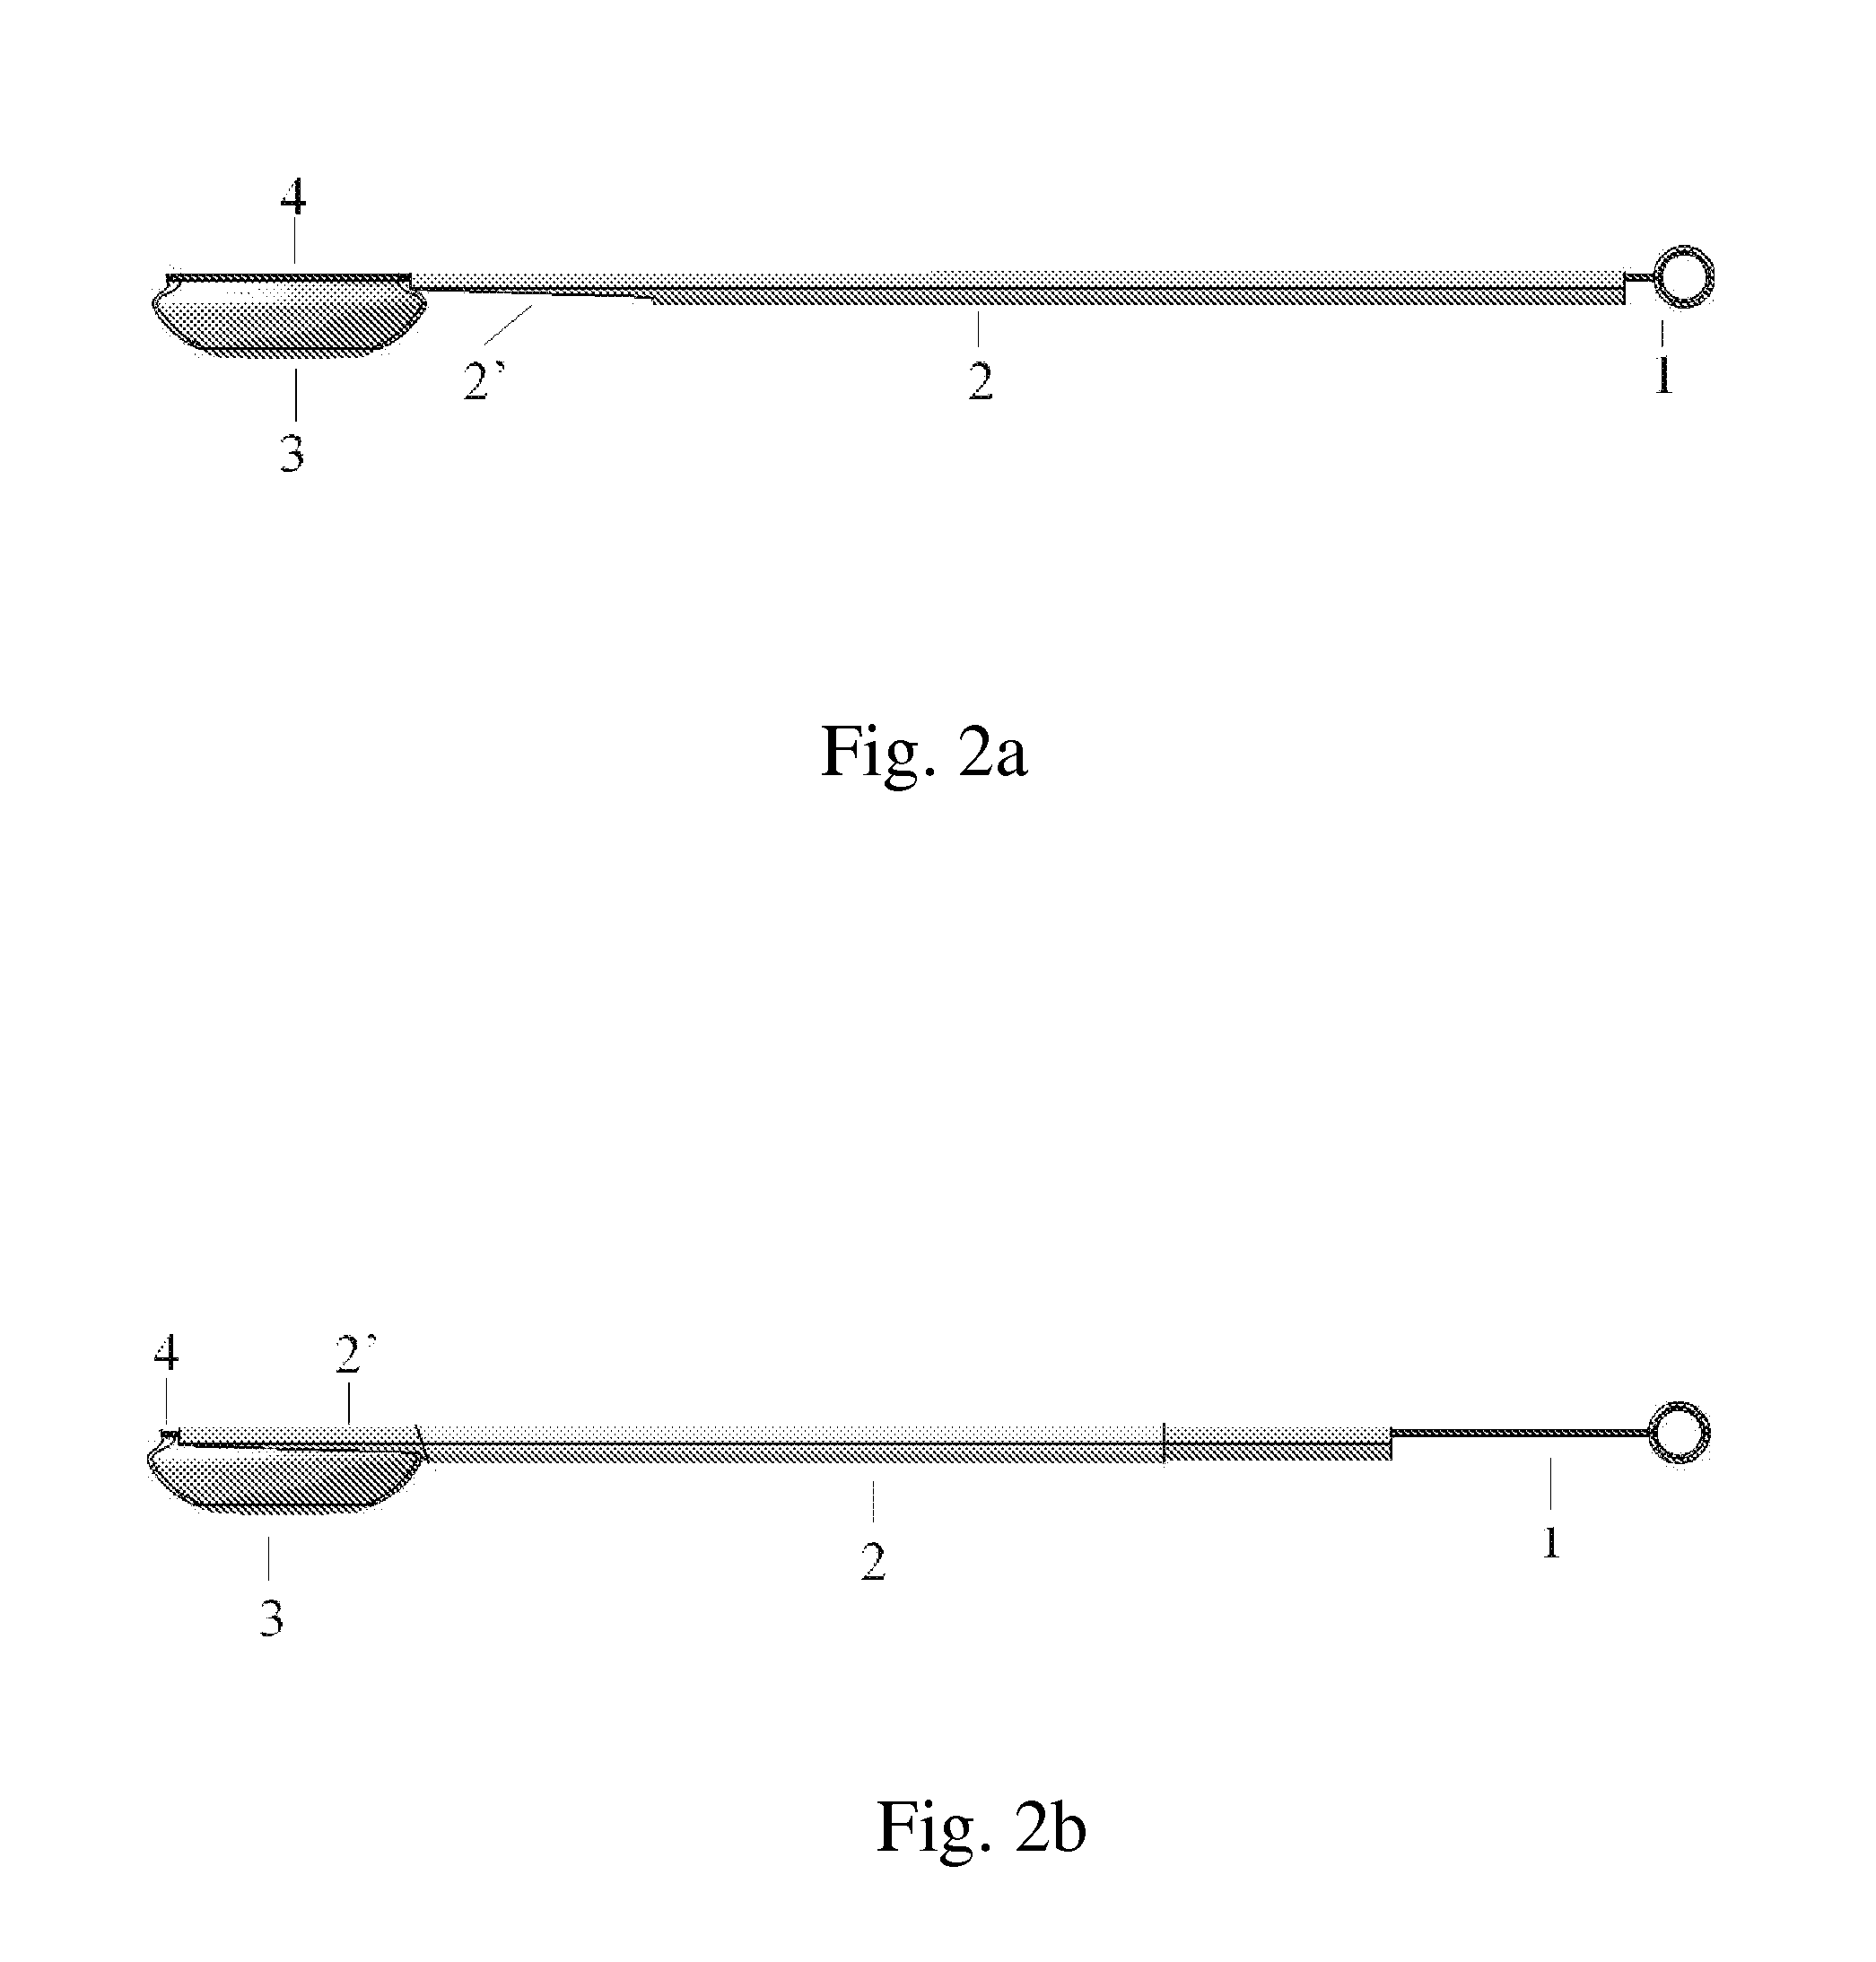 Device for Removing Tissue